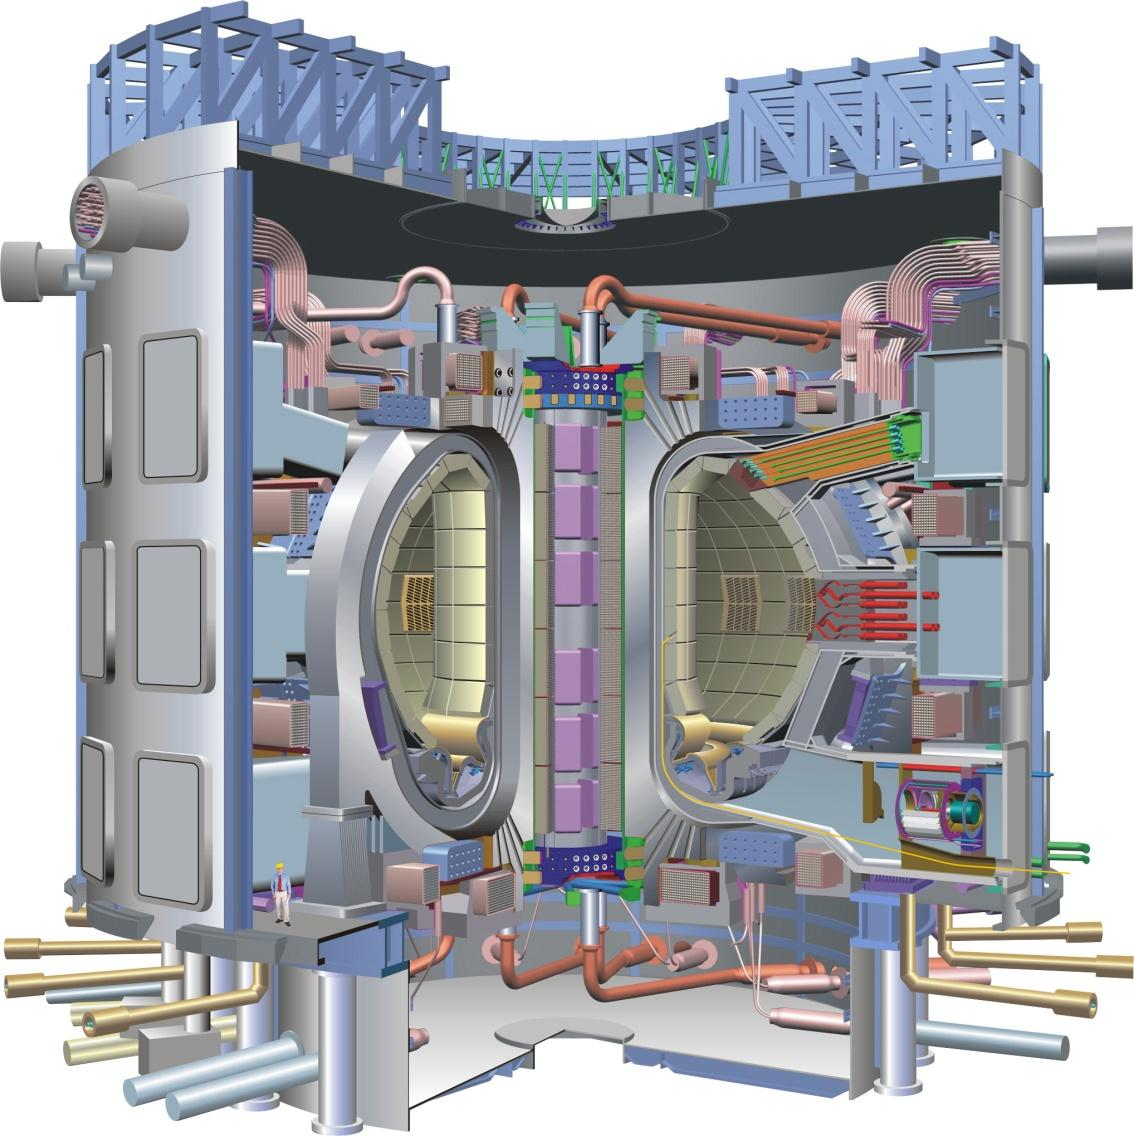 Towards a Long-lasting «sustainable» Energy Crisis «Prospects for practical applications of fusion power to solve our energy problems appear dubious on engineering grounds.